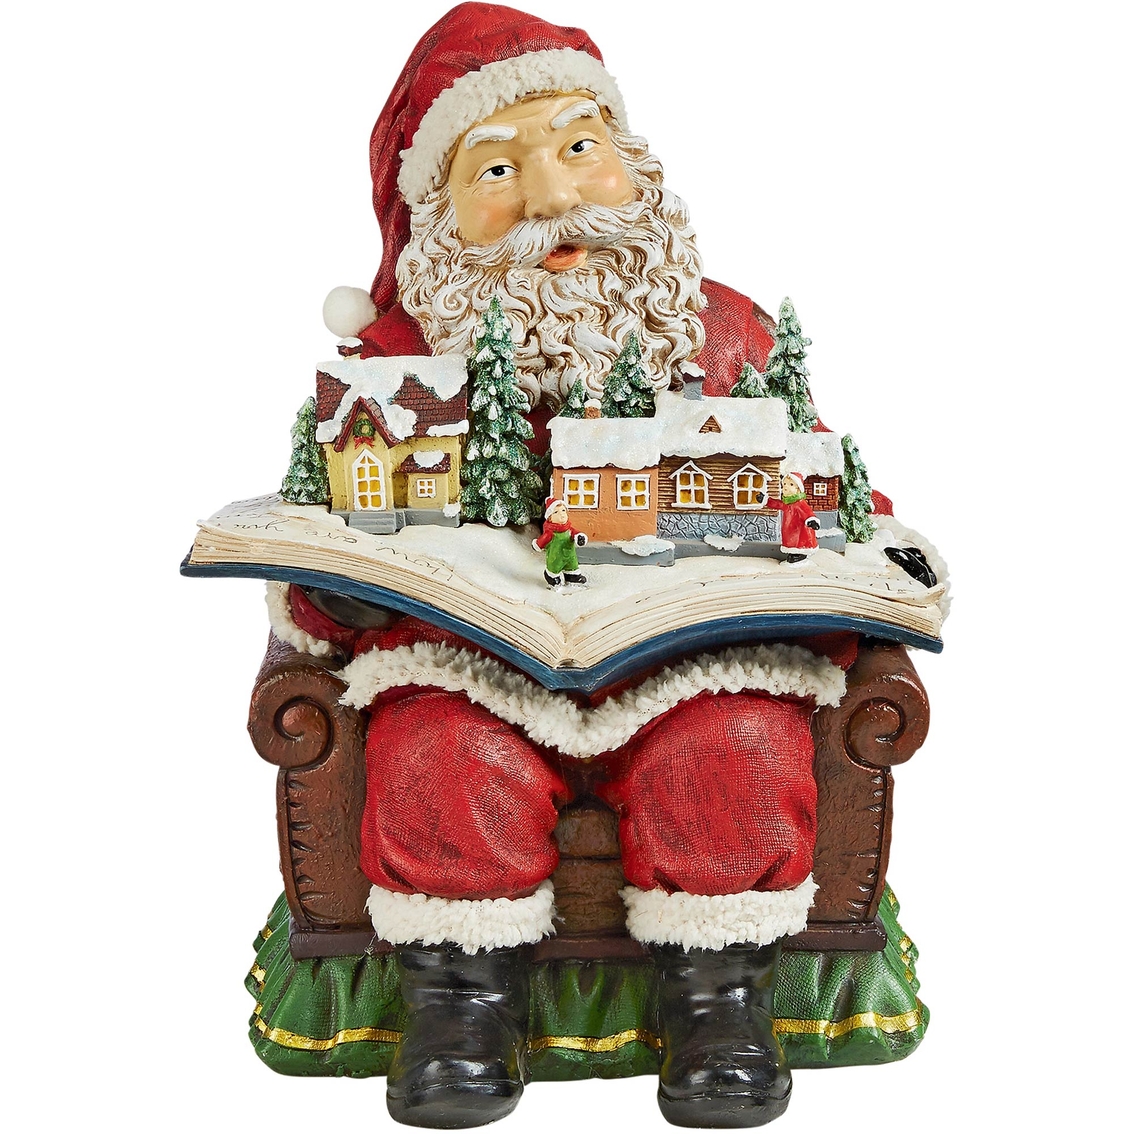 Design Toscano Santa's Coming to Town Holiday Statue - Image 2 of 4